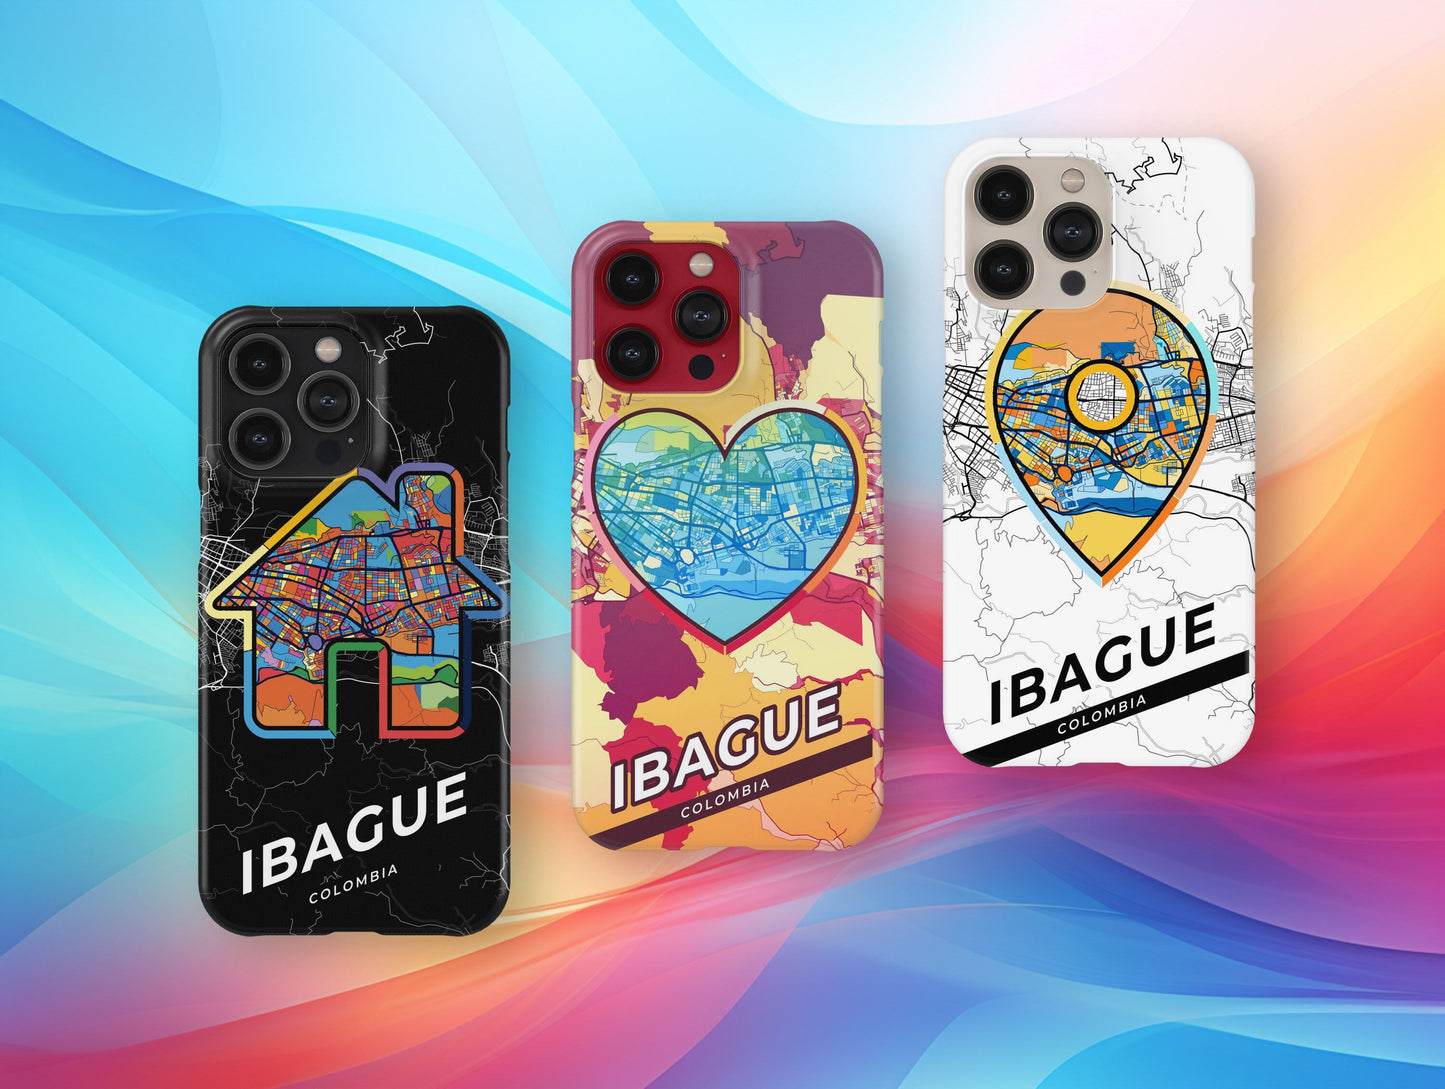 Ibague Colombia slim phone case with colorful icon. Birthday, wedding or housewarming gift. Couple match cases.